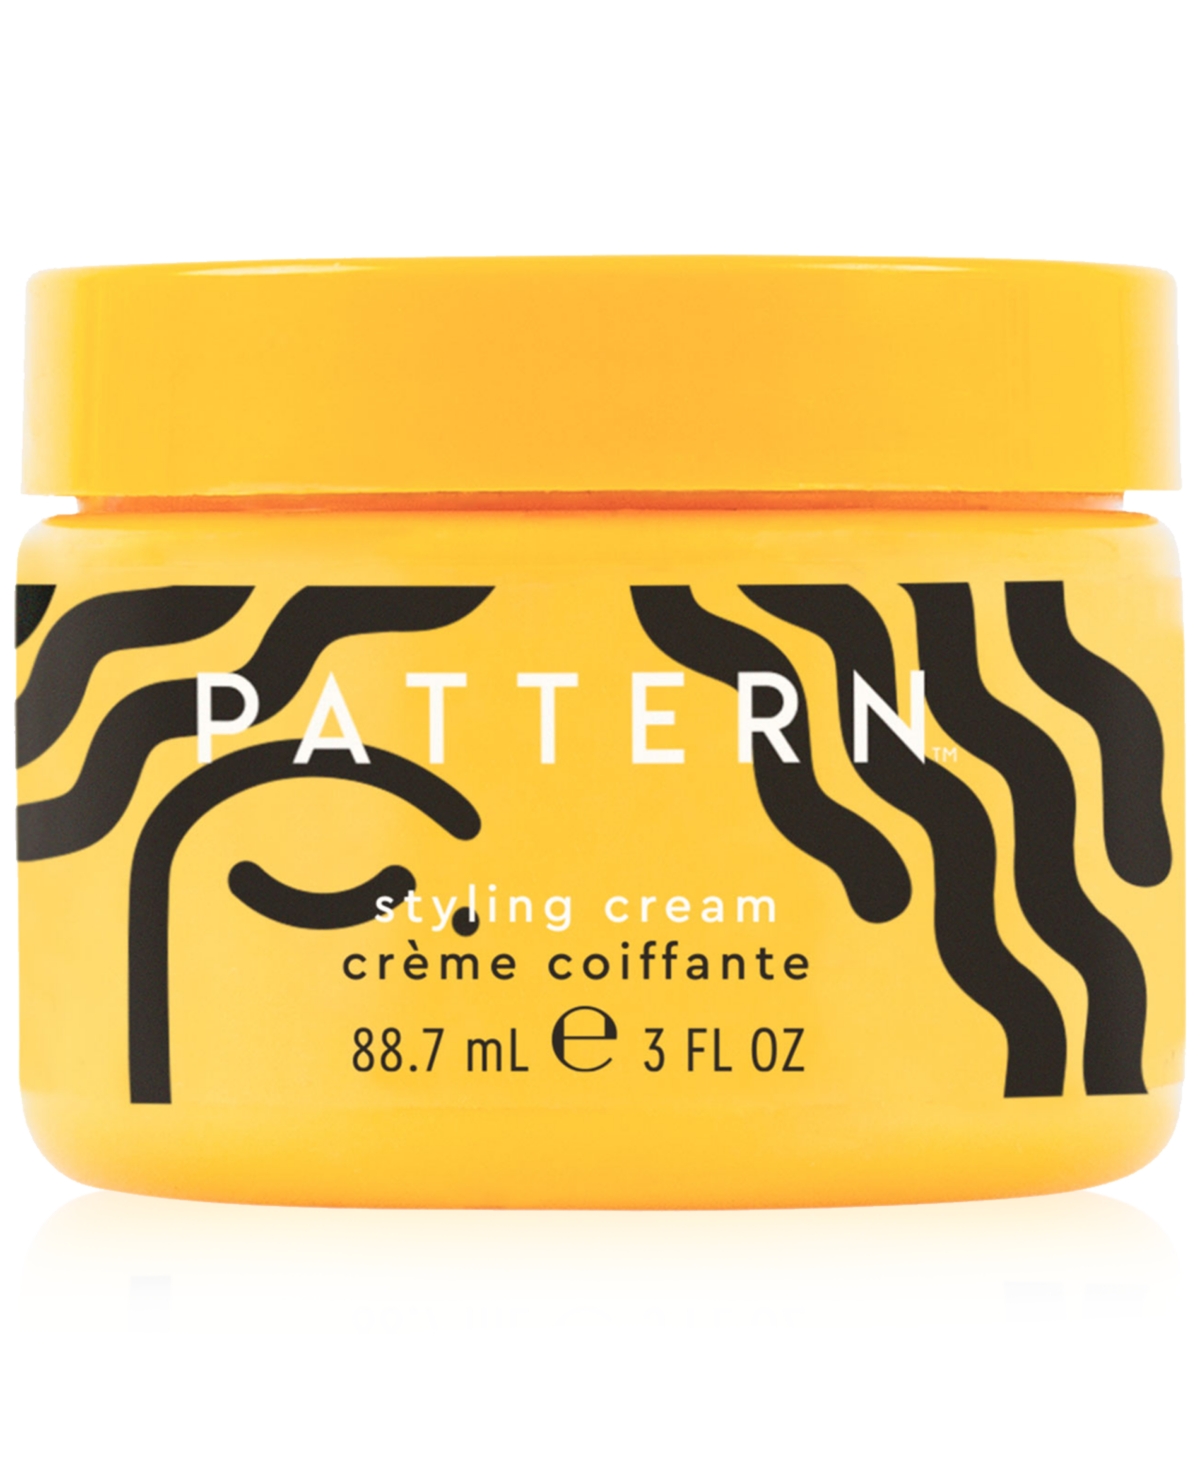 Pattern Beauty By Tracee Ellis Ross Styling Cream, 3 Oz. In No Color